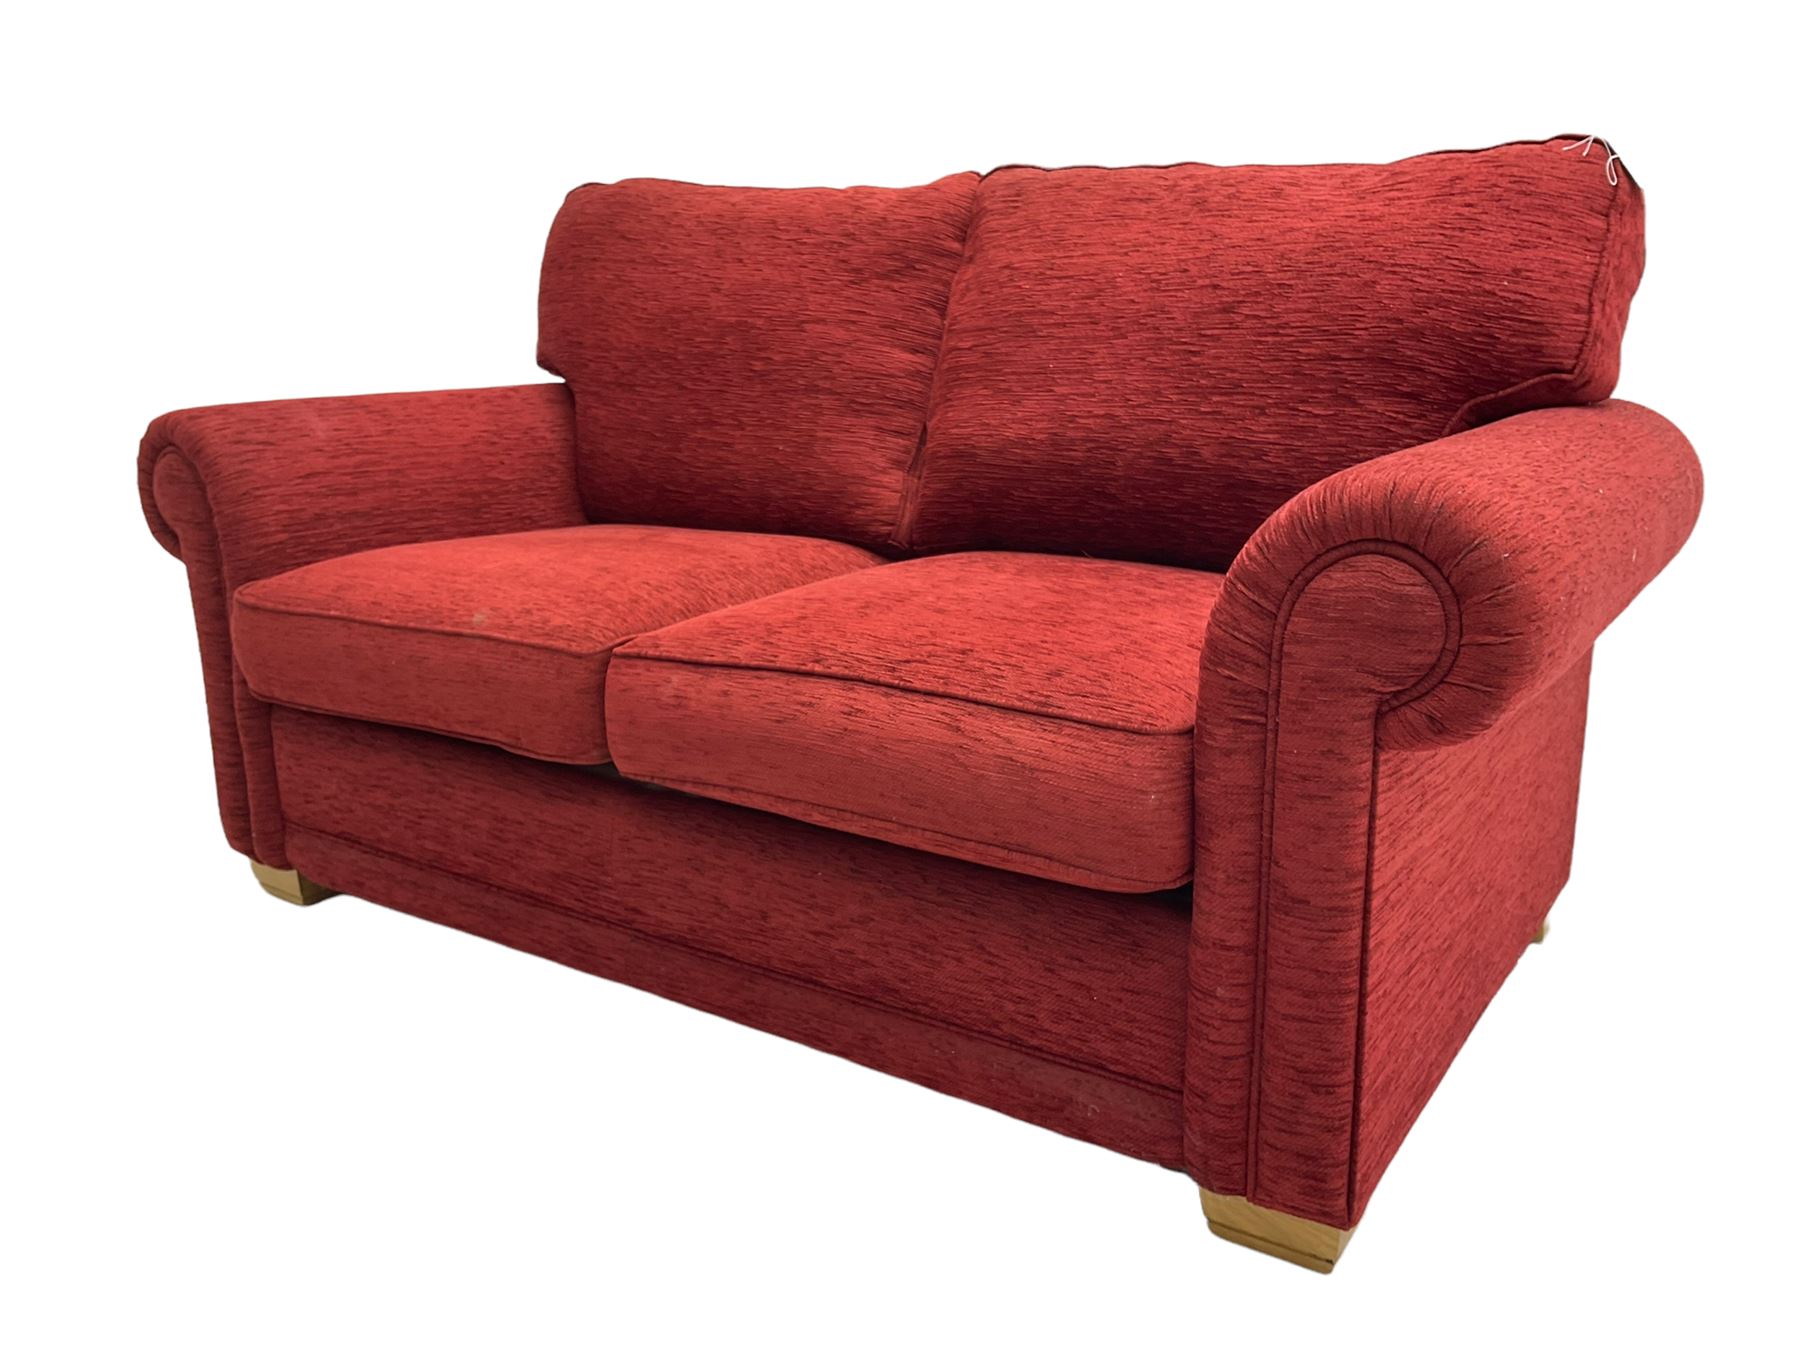 Two seat metal actions sofa bed upholstered in red cover - Image 3 of 6